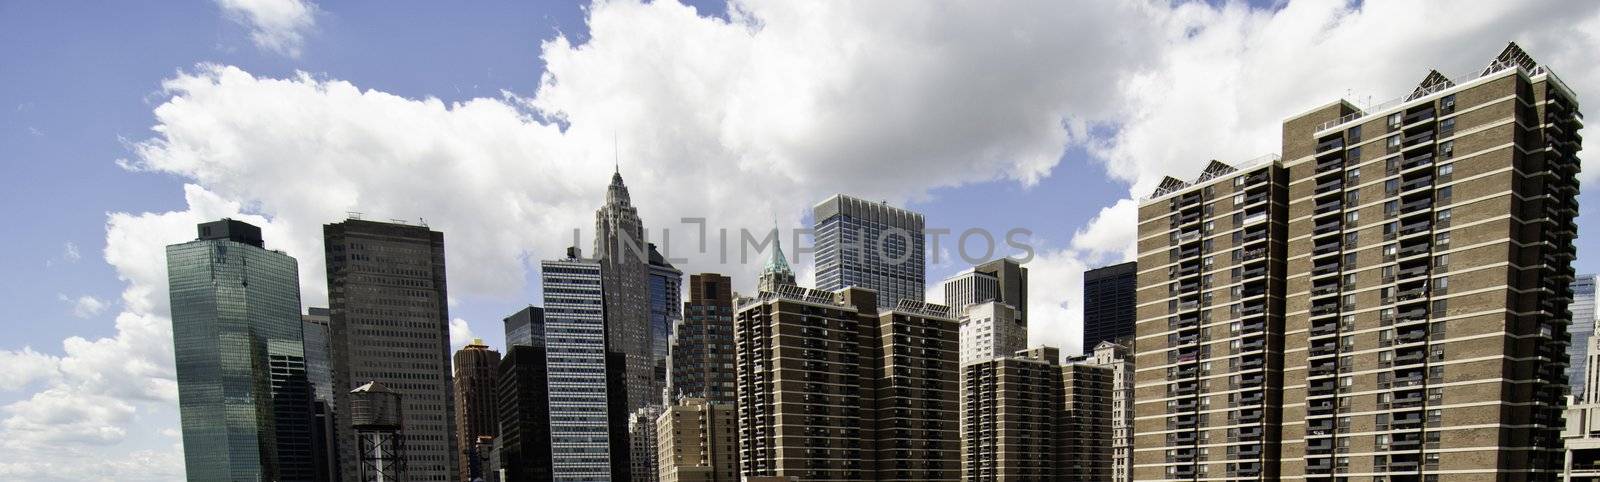 Panoramic View of New York City Buildings, U.S.A.